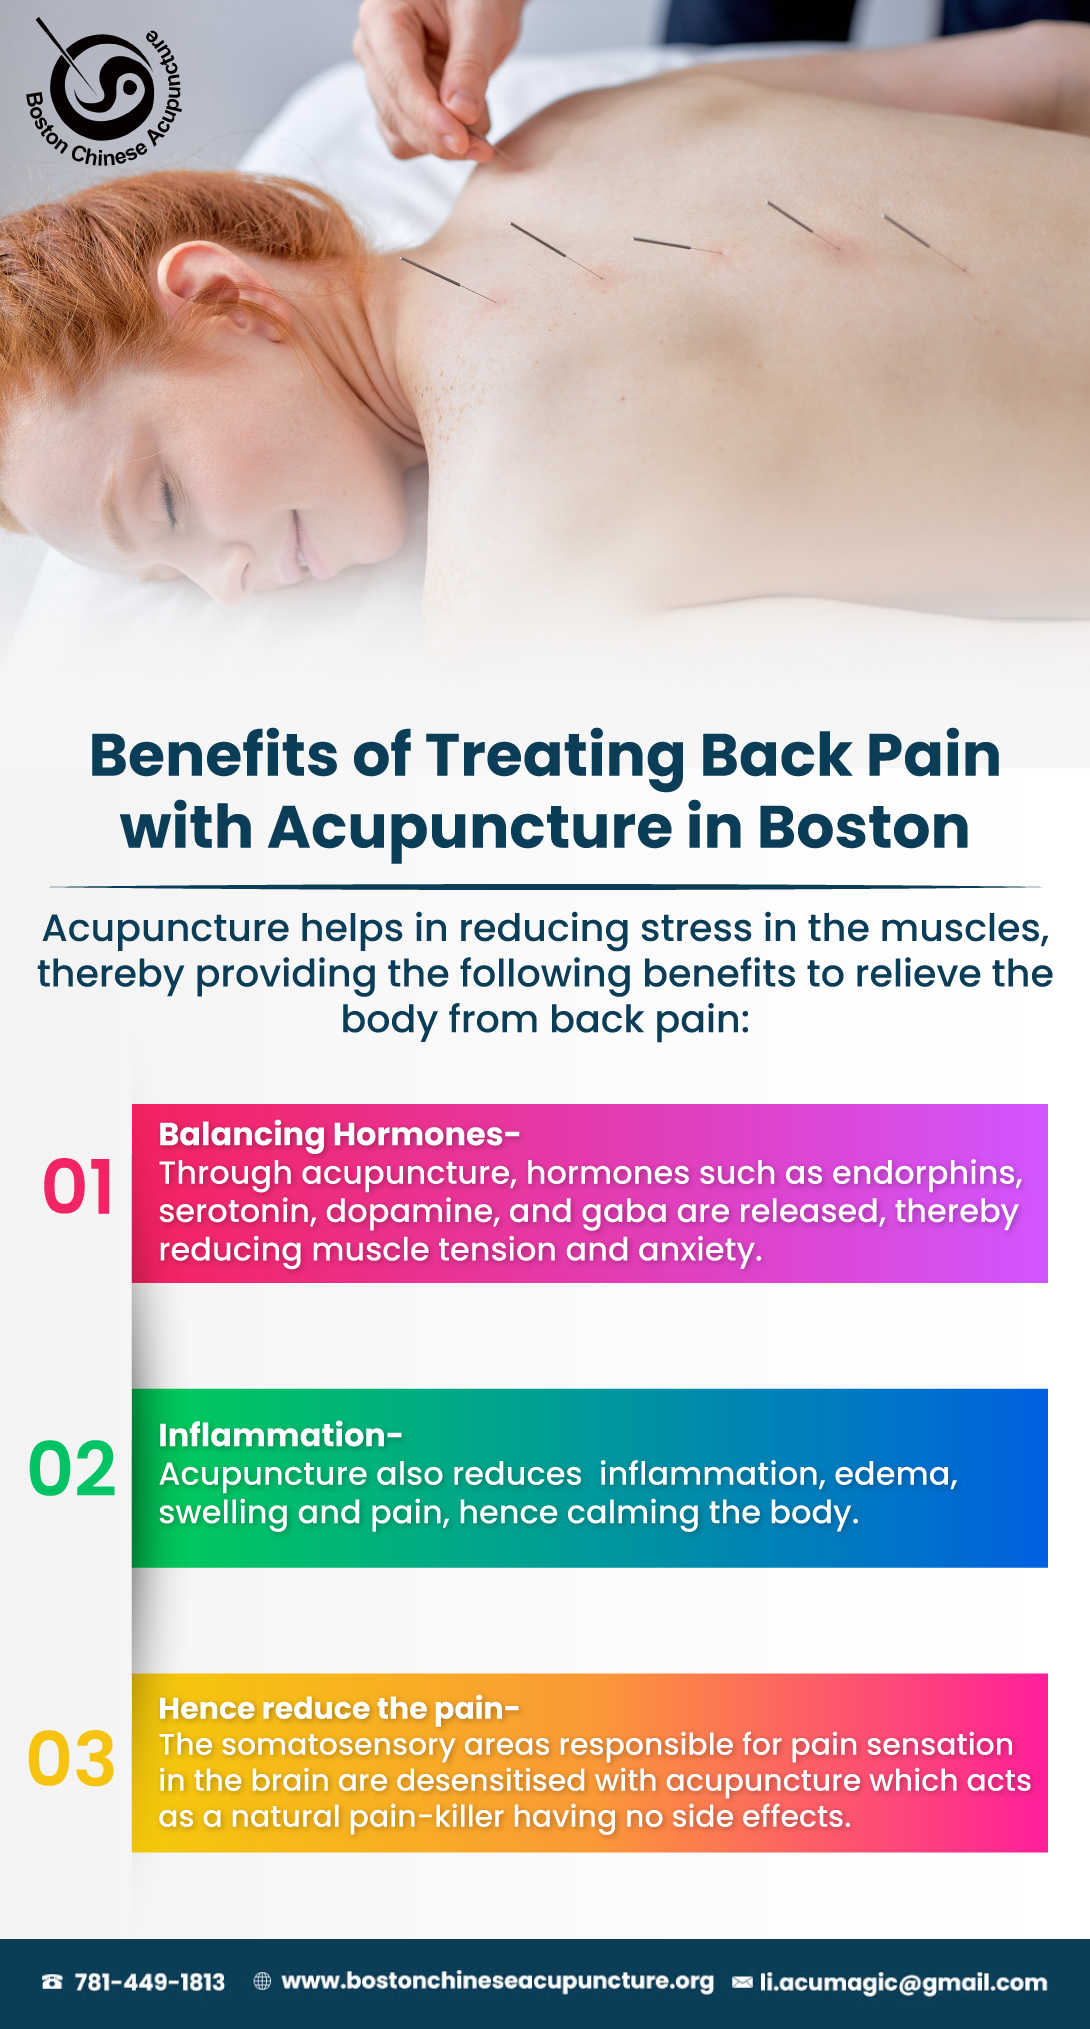 Benefits of Treating Back Pain with Acupuncture in Boston